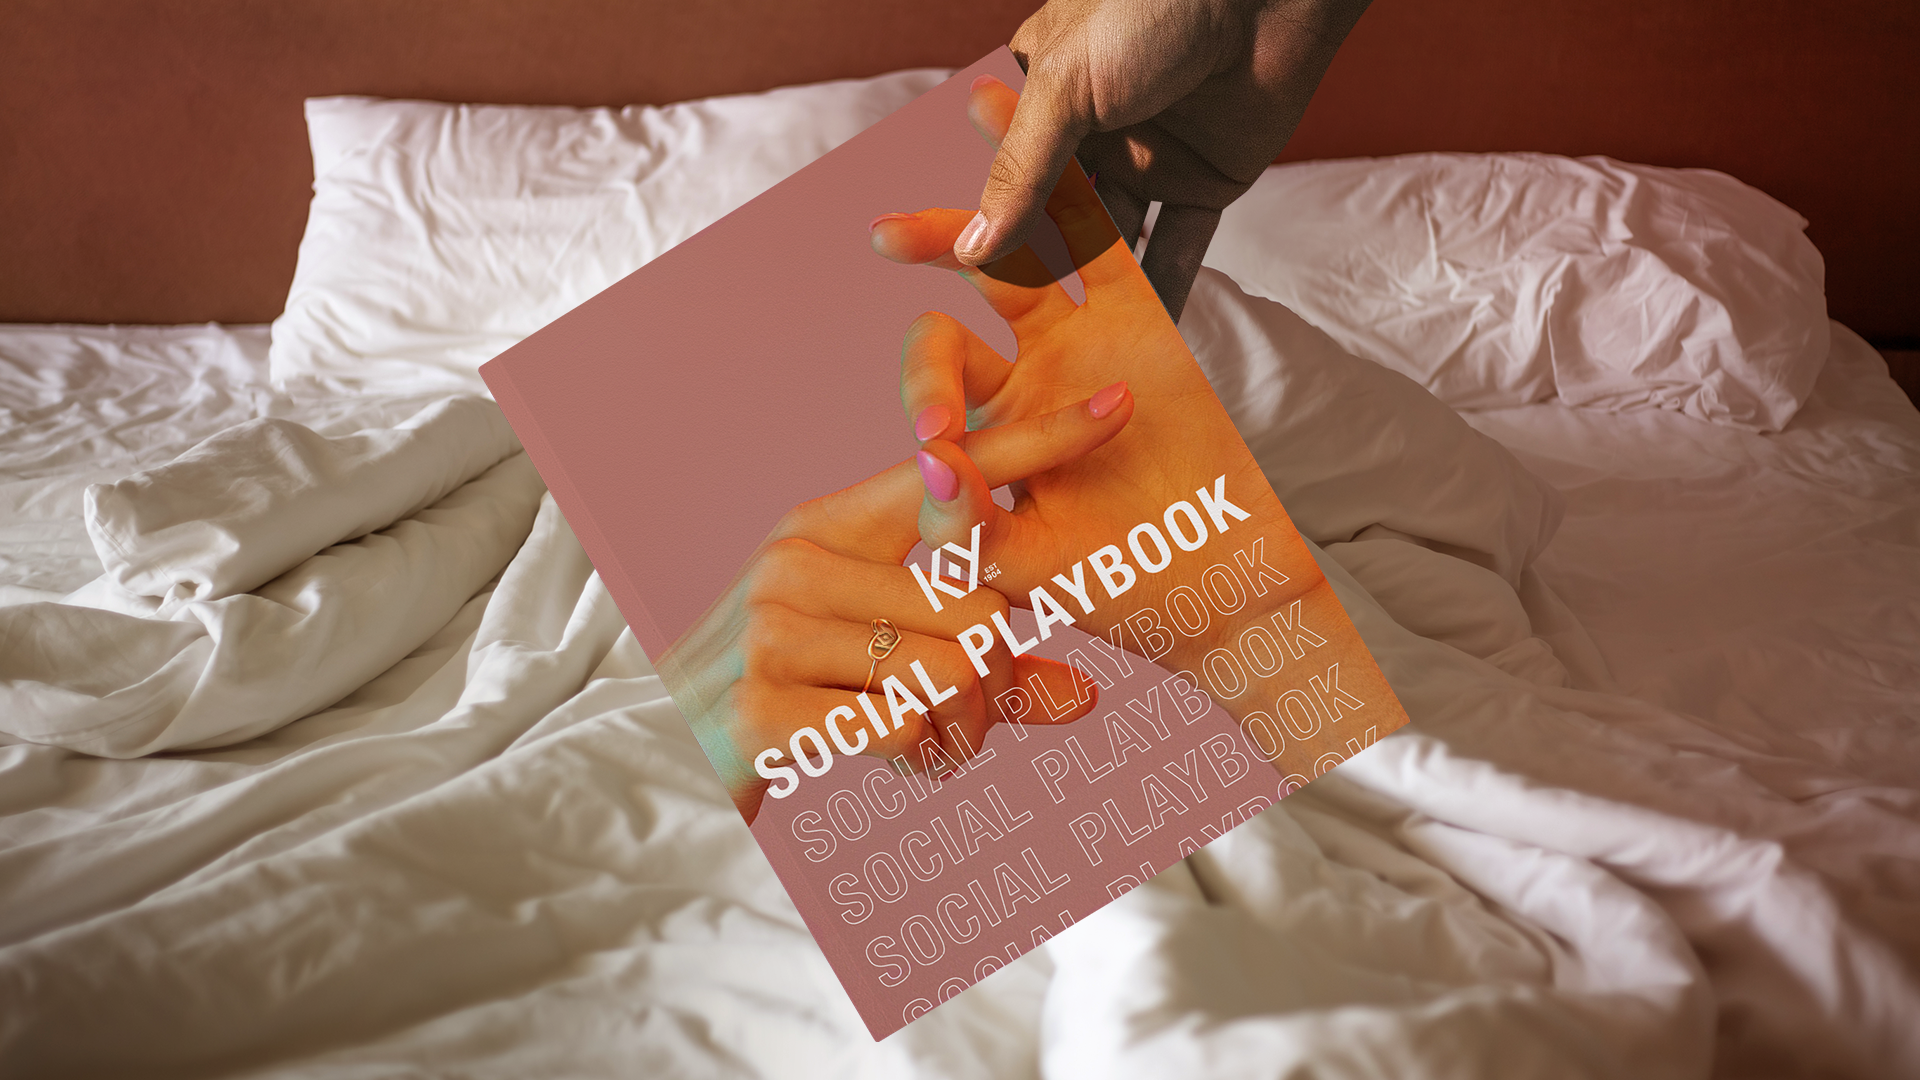  Come As You Are social playbook for K-Y by Tom Morhous and Barbarian 